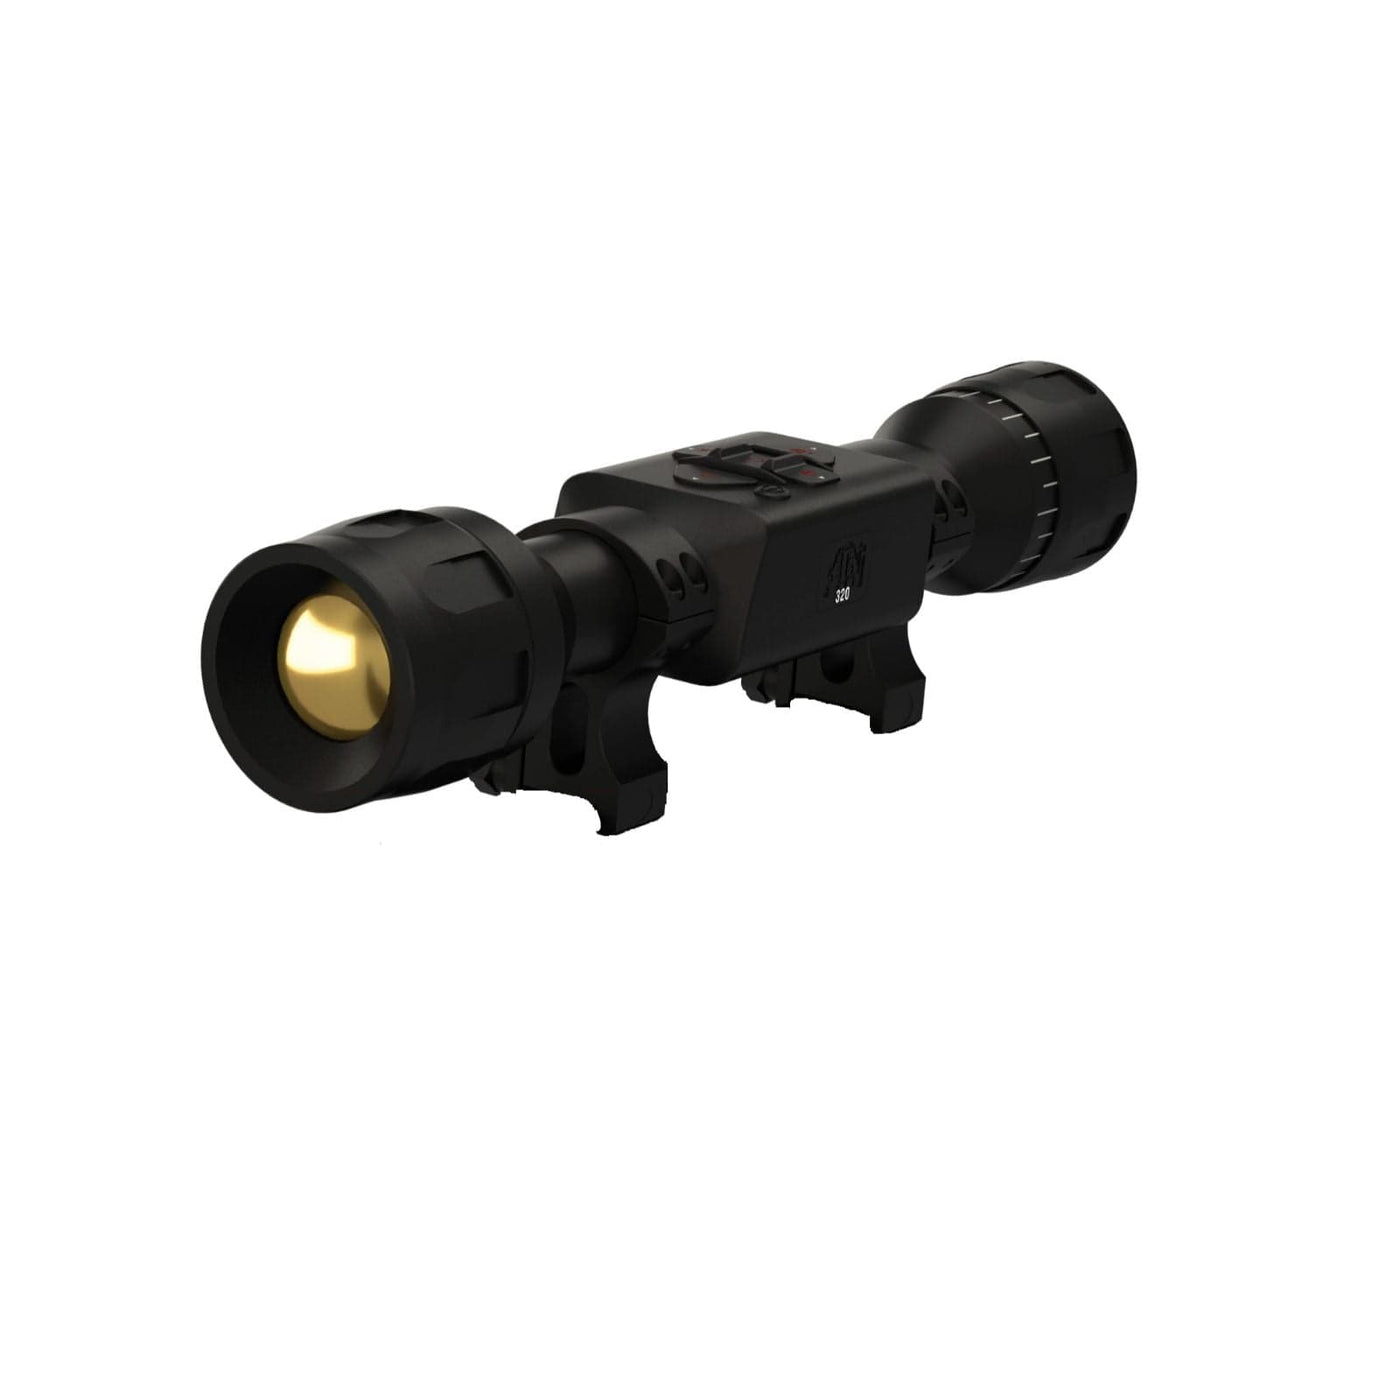 ATN ATN Thor-LT 4-8x 320x240 12 micron Thermal Rifle Scope Nightvision And Thermal